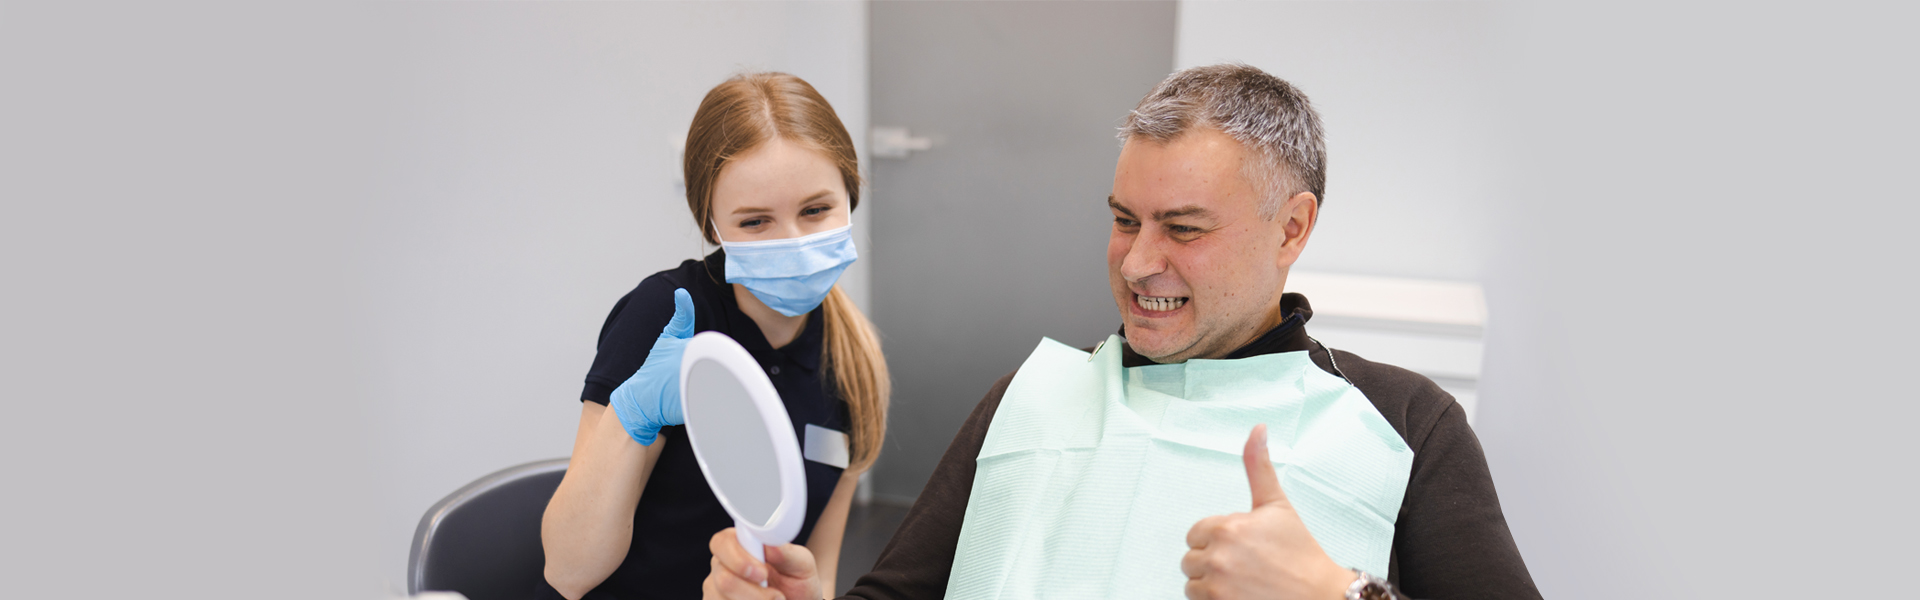 How to Find the Best Dentist Near Me